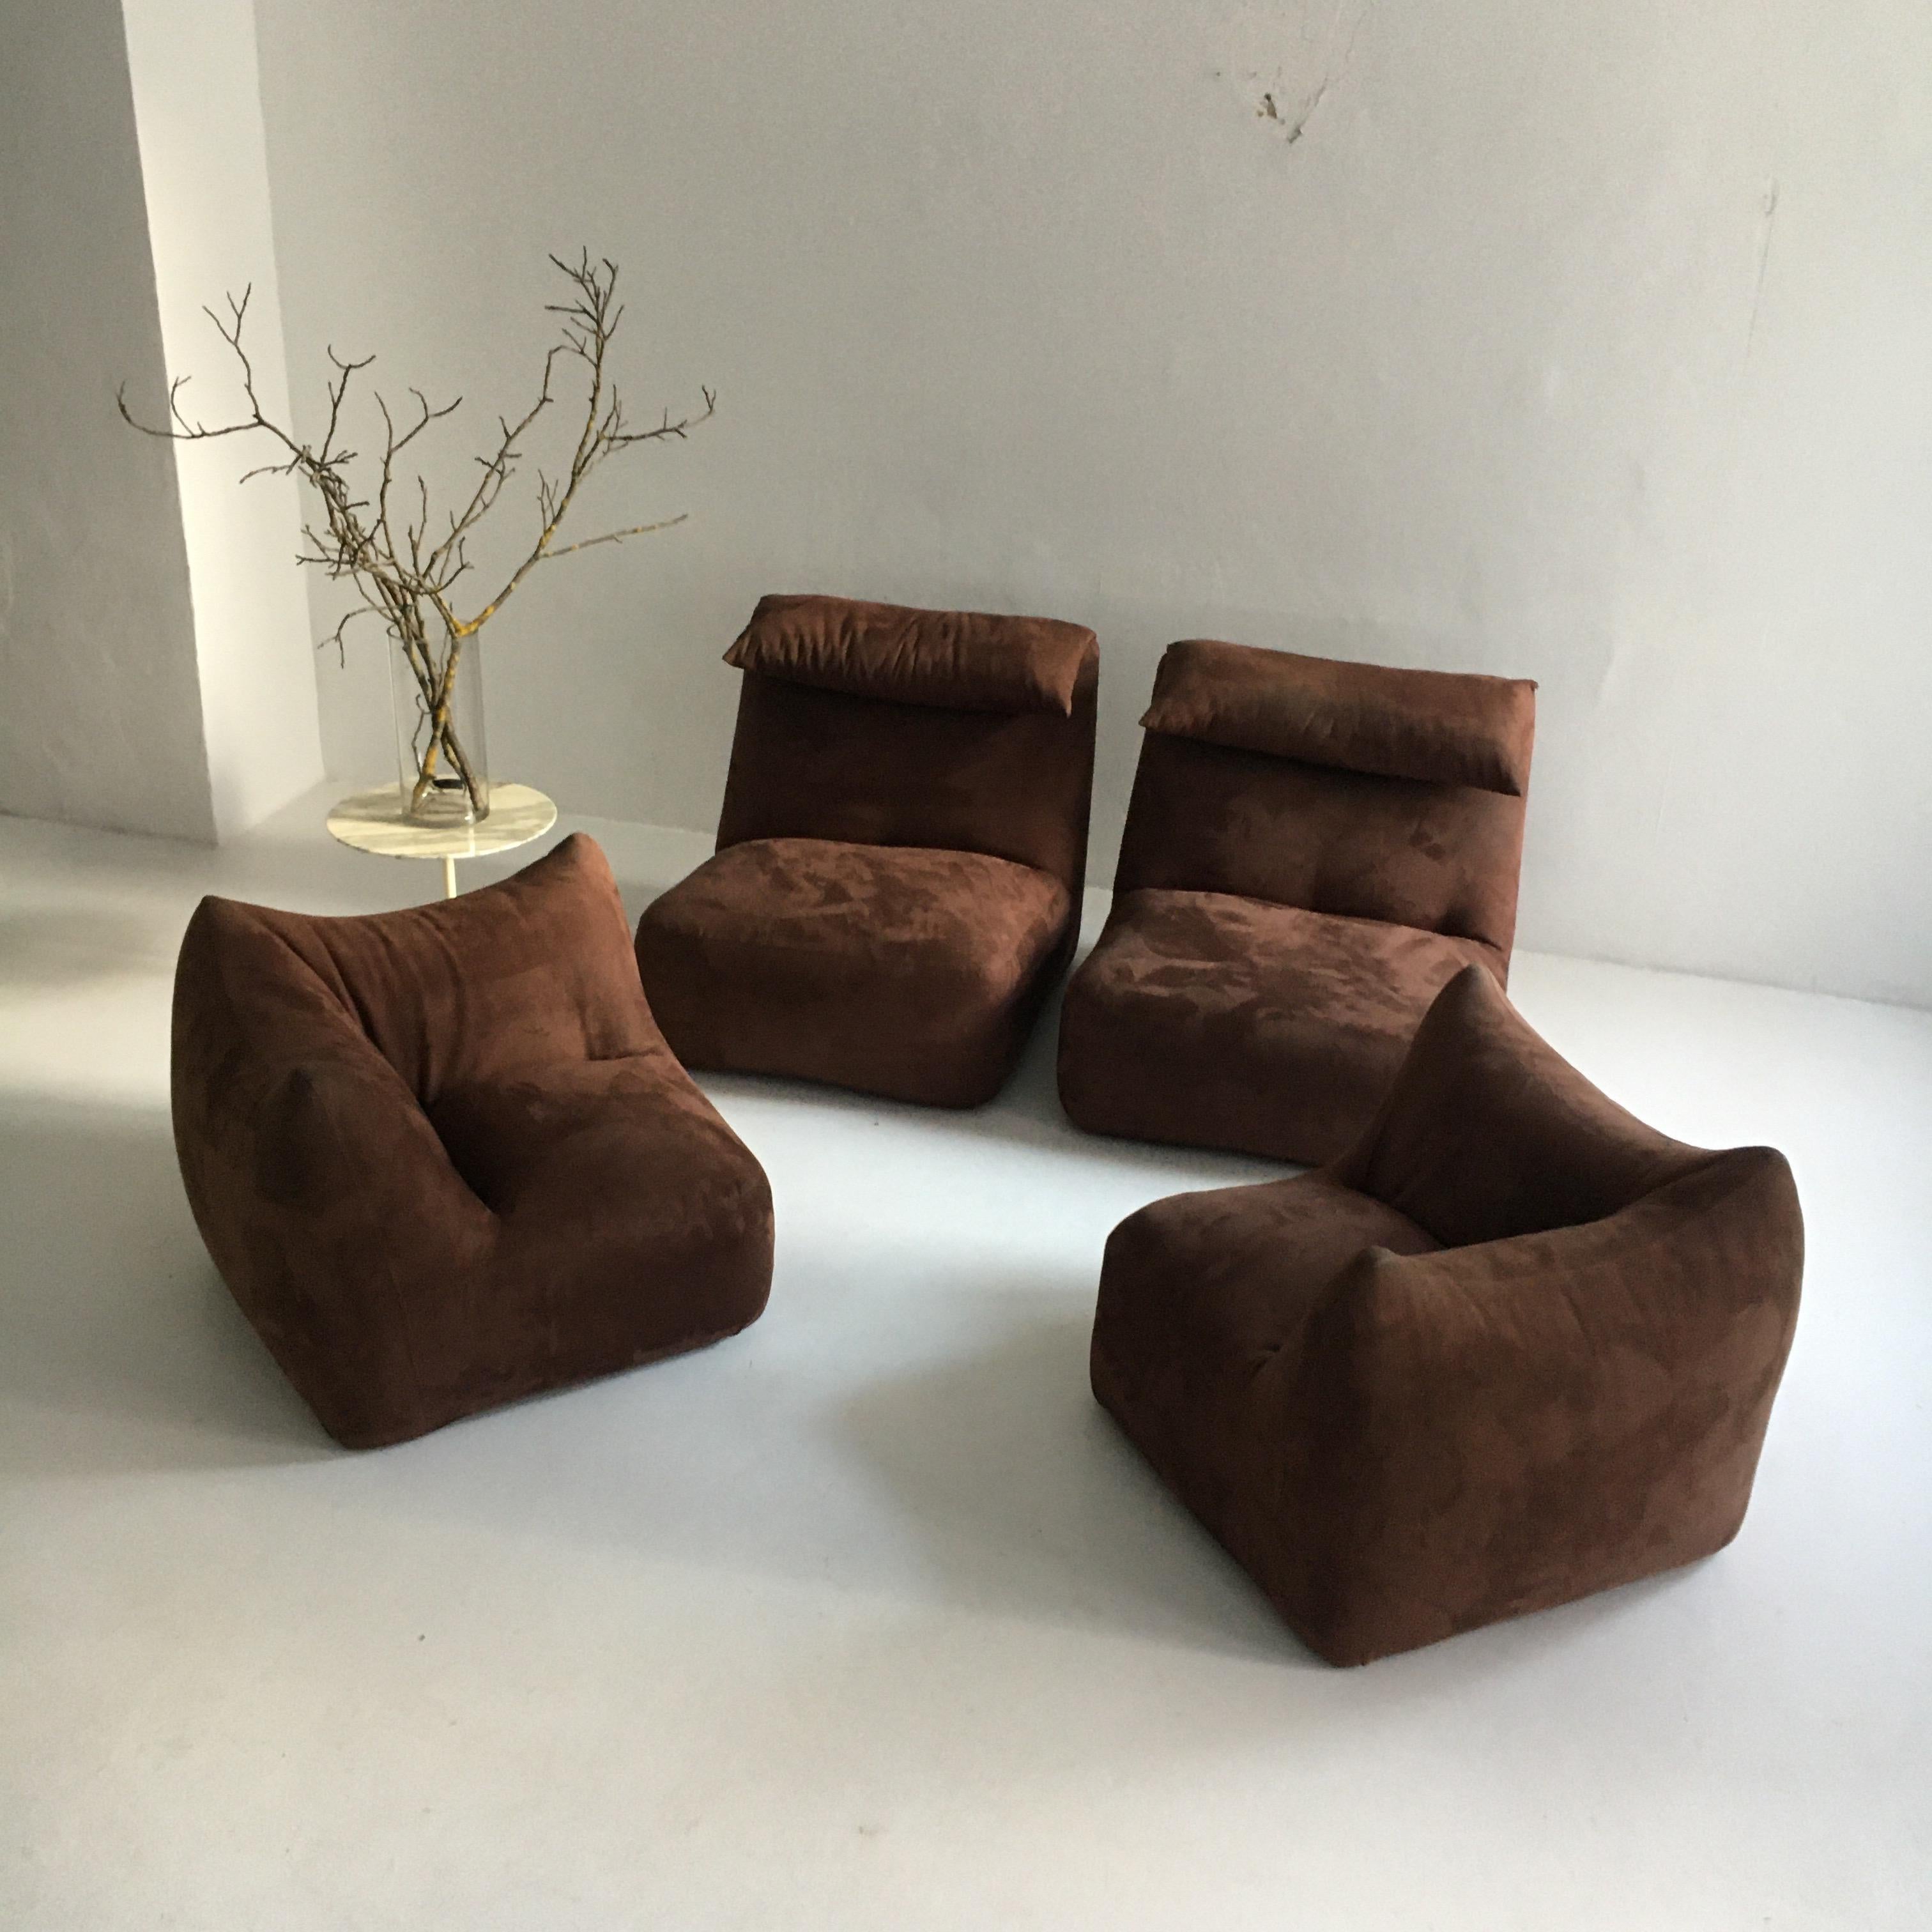 Mario Bellini 'Le Bambole' Two Modular Elements, Pair of Lounge Chairs, Italy 7